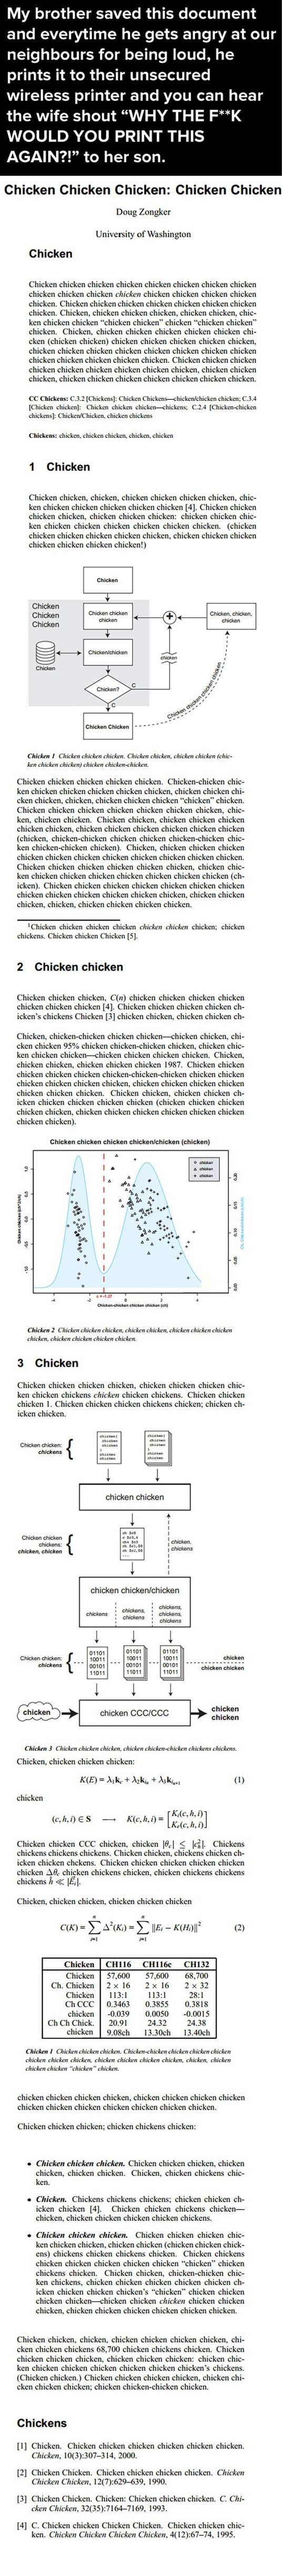 Chicken has no meaning anymore